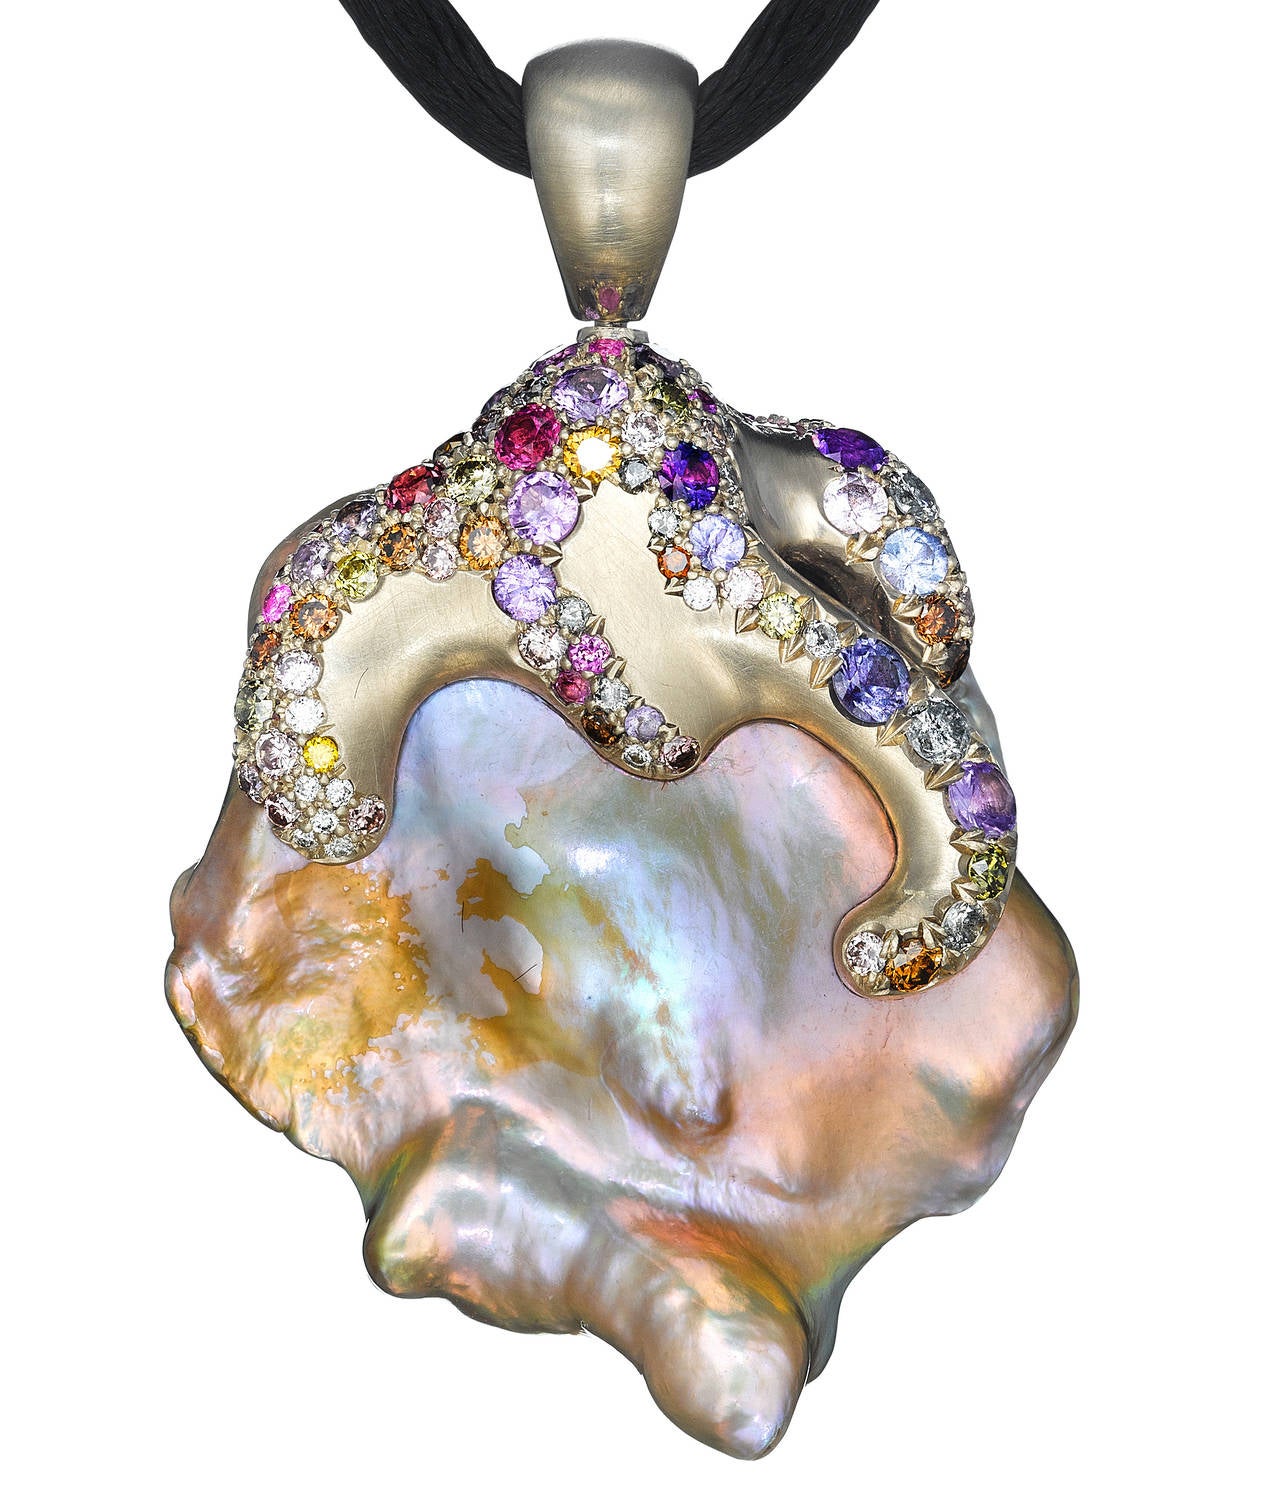 Freshwater pearl pendant with 18k palladium white gold, pink diamonds, olive diamonds, and multicolored sapphires.

Internationally award winning designer Naomi Sarna creates gem carvings and jewels of unusual beauty. She is represented in the